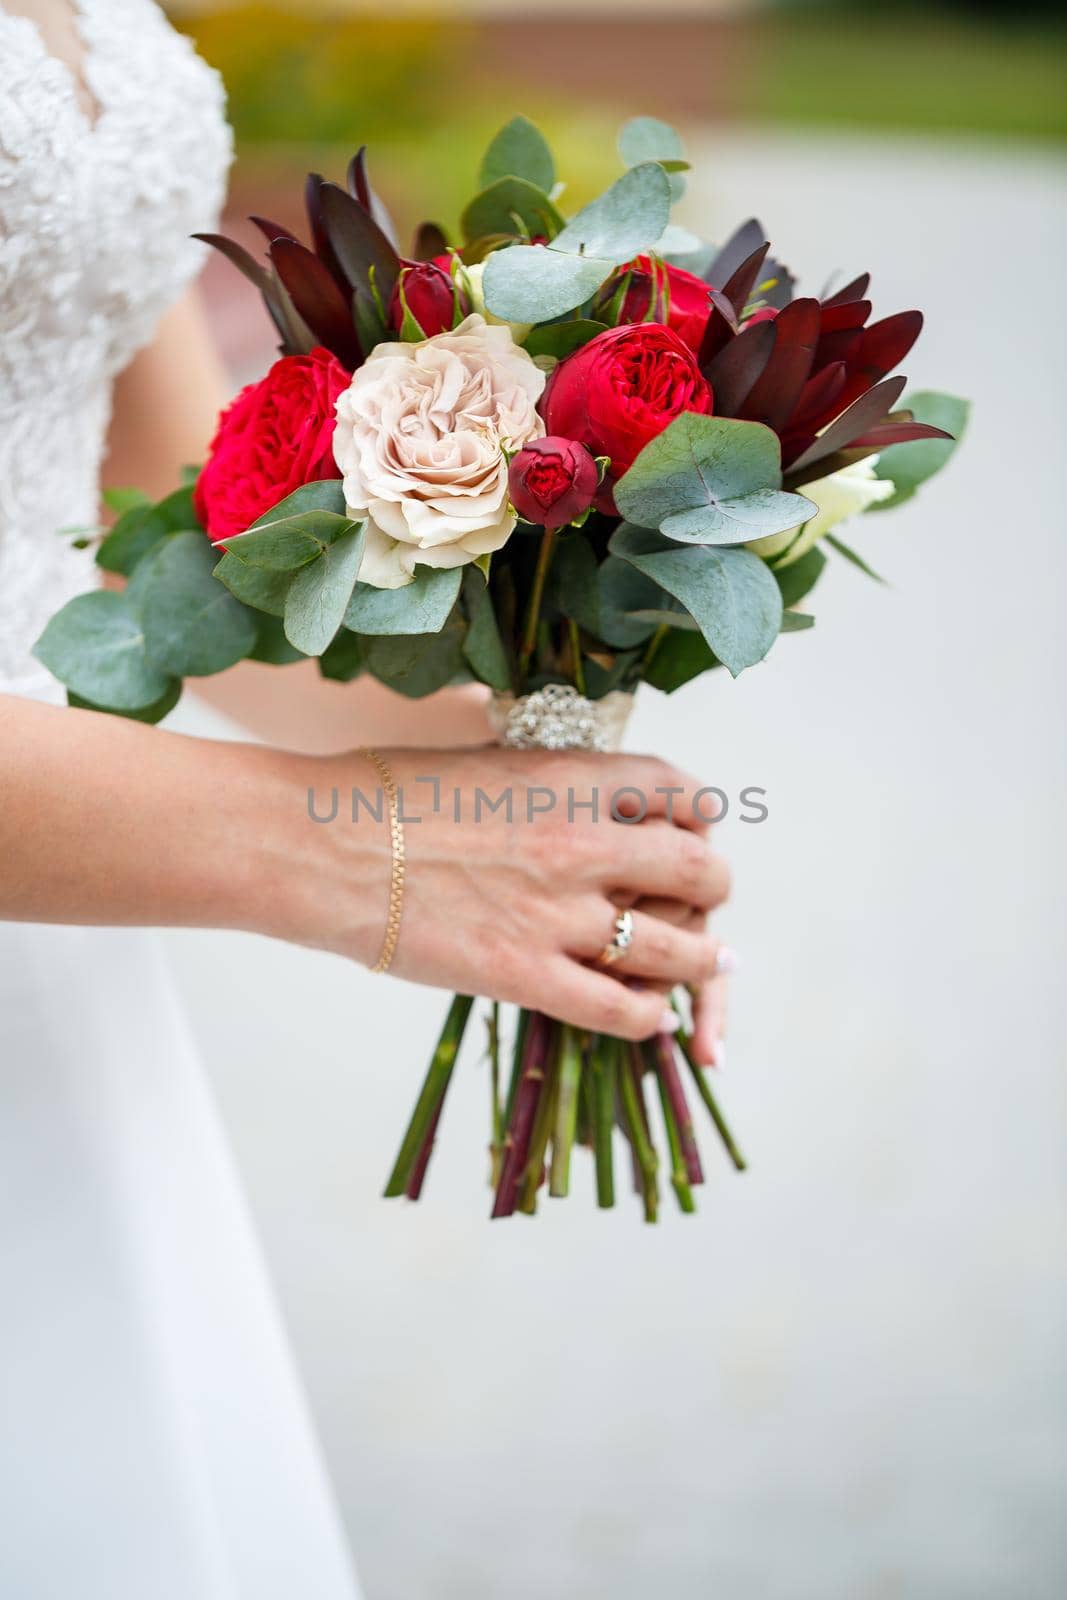 Beautiful wedding bouquet of flowers in the hands of the newlyweds by Dmitrytph